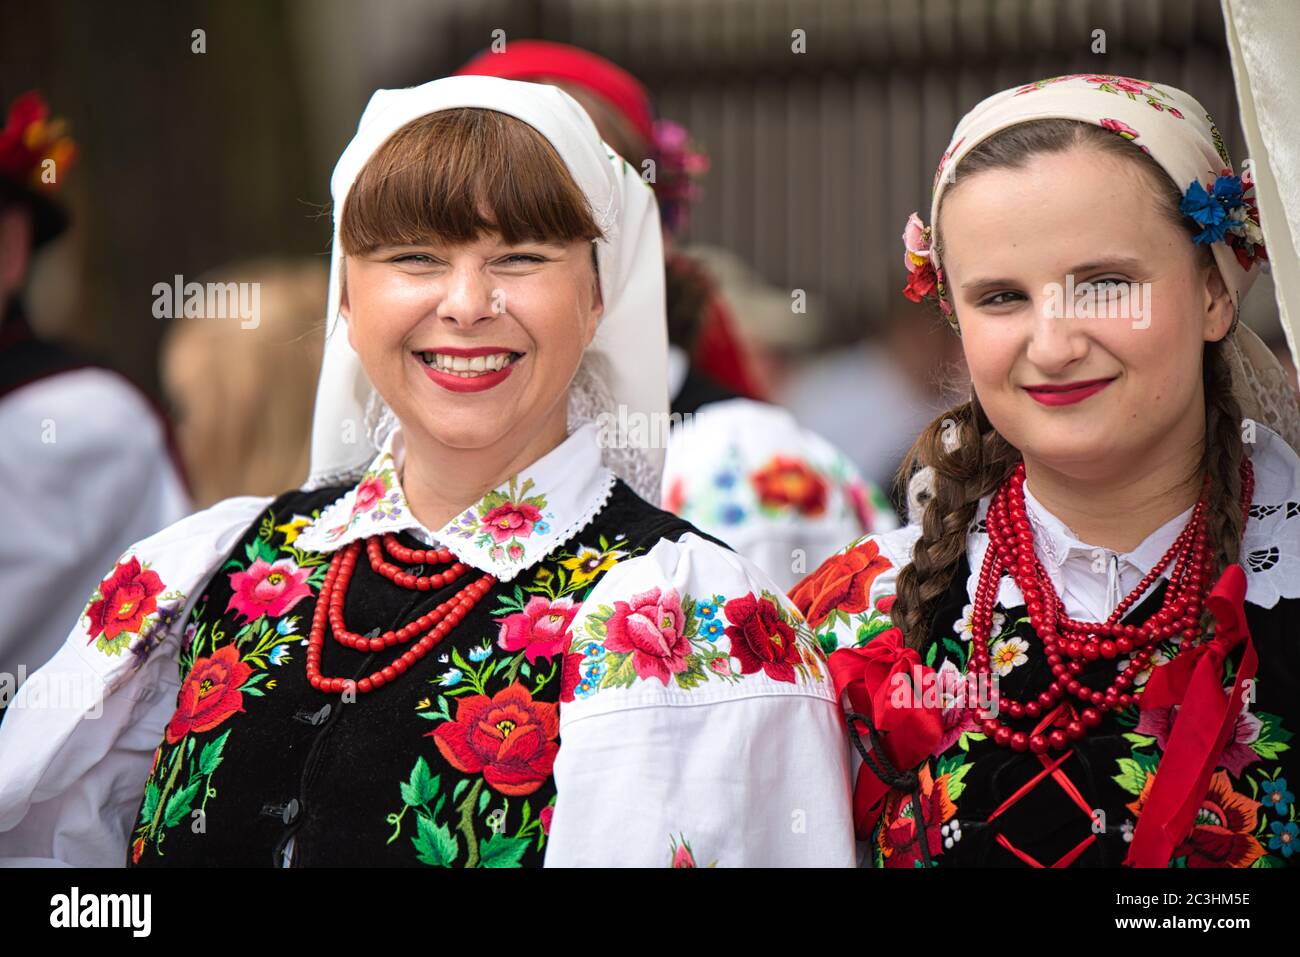 Lowicz, Jun 11, 2020: Portraits of women dressed in polish national folk costumes from Lowicz region. Polish folk dress with floral embroidery Stock Photo